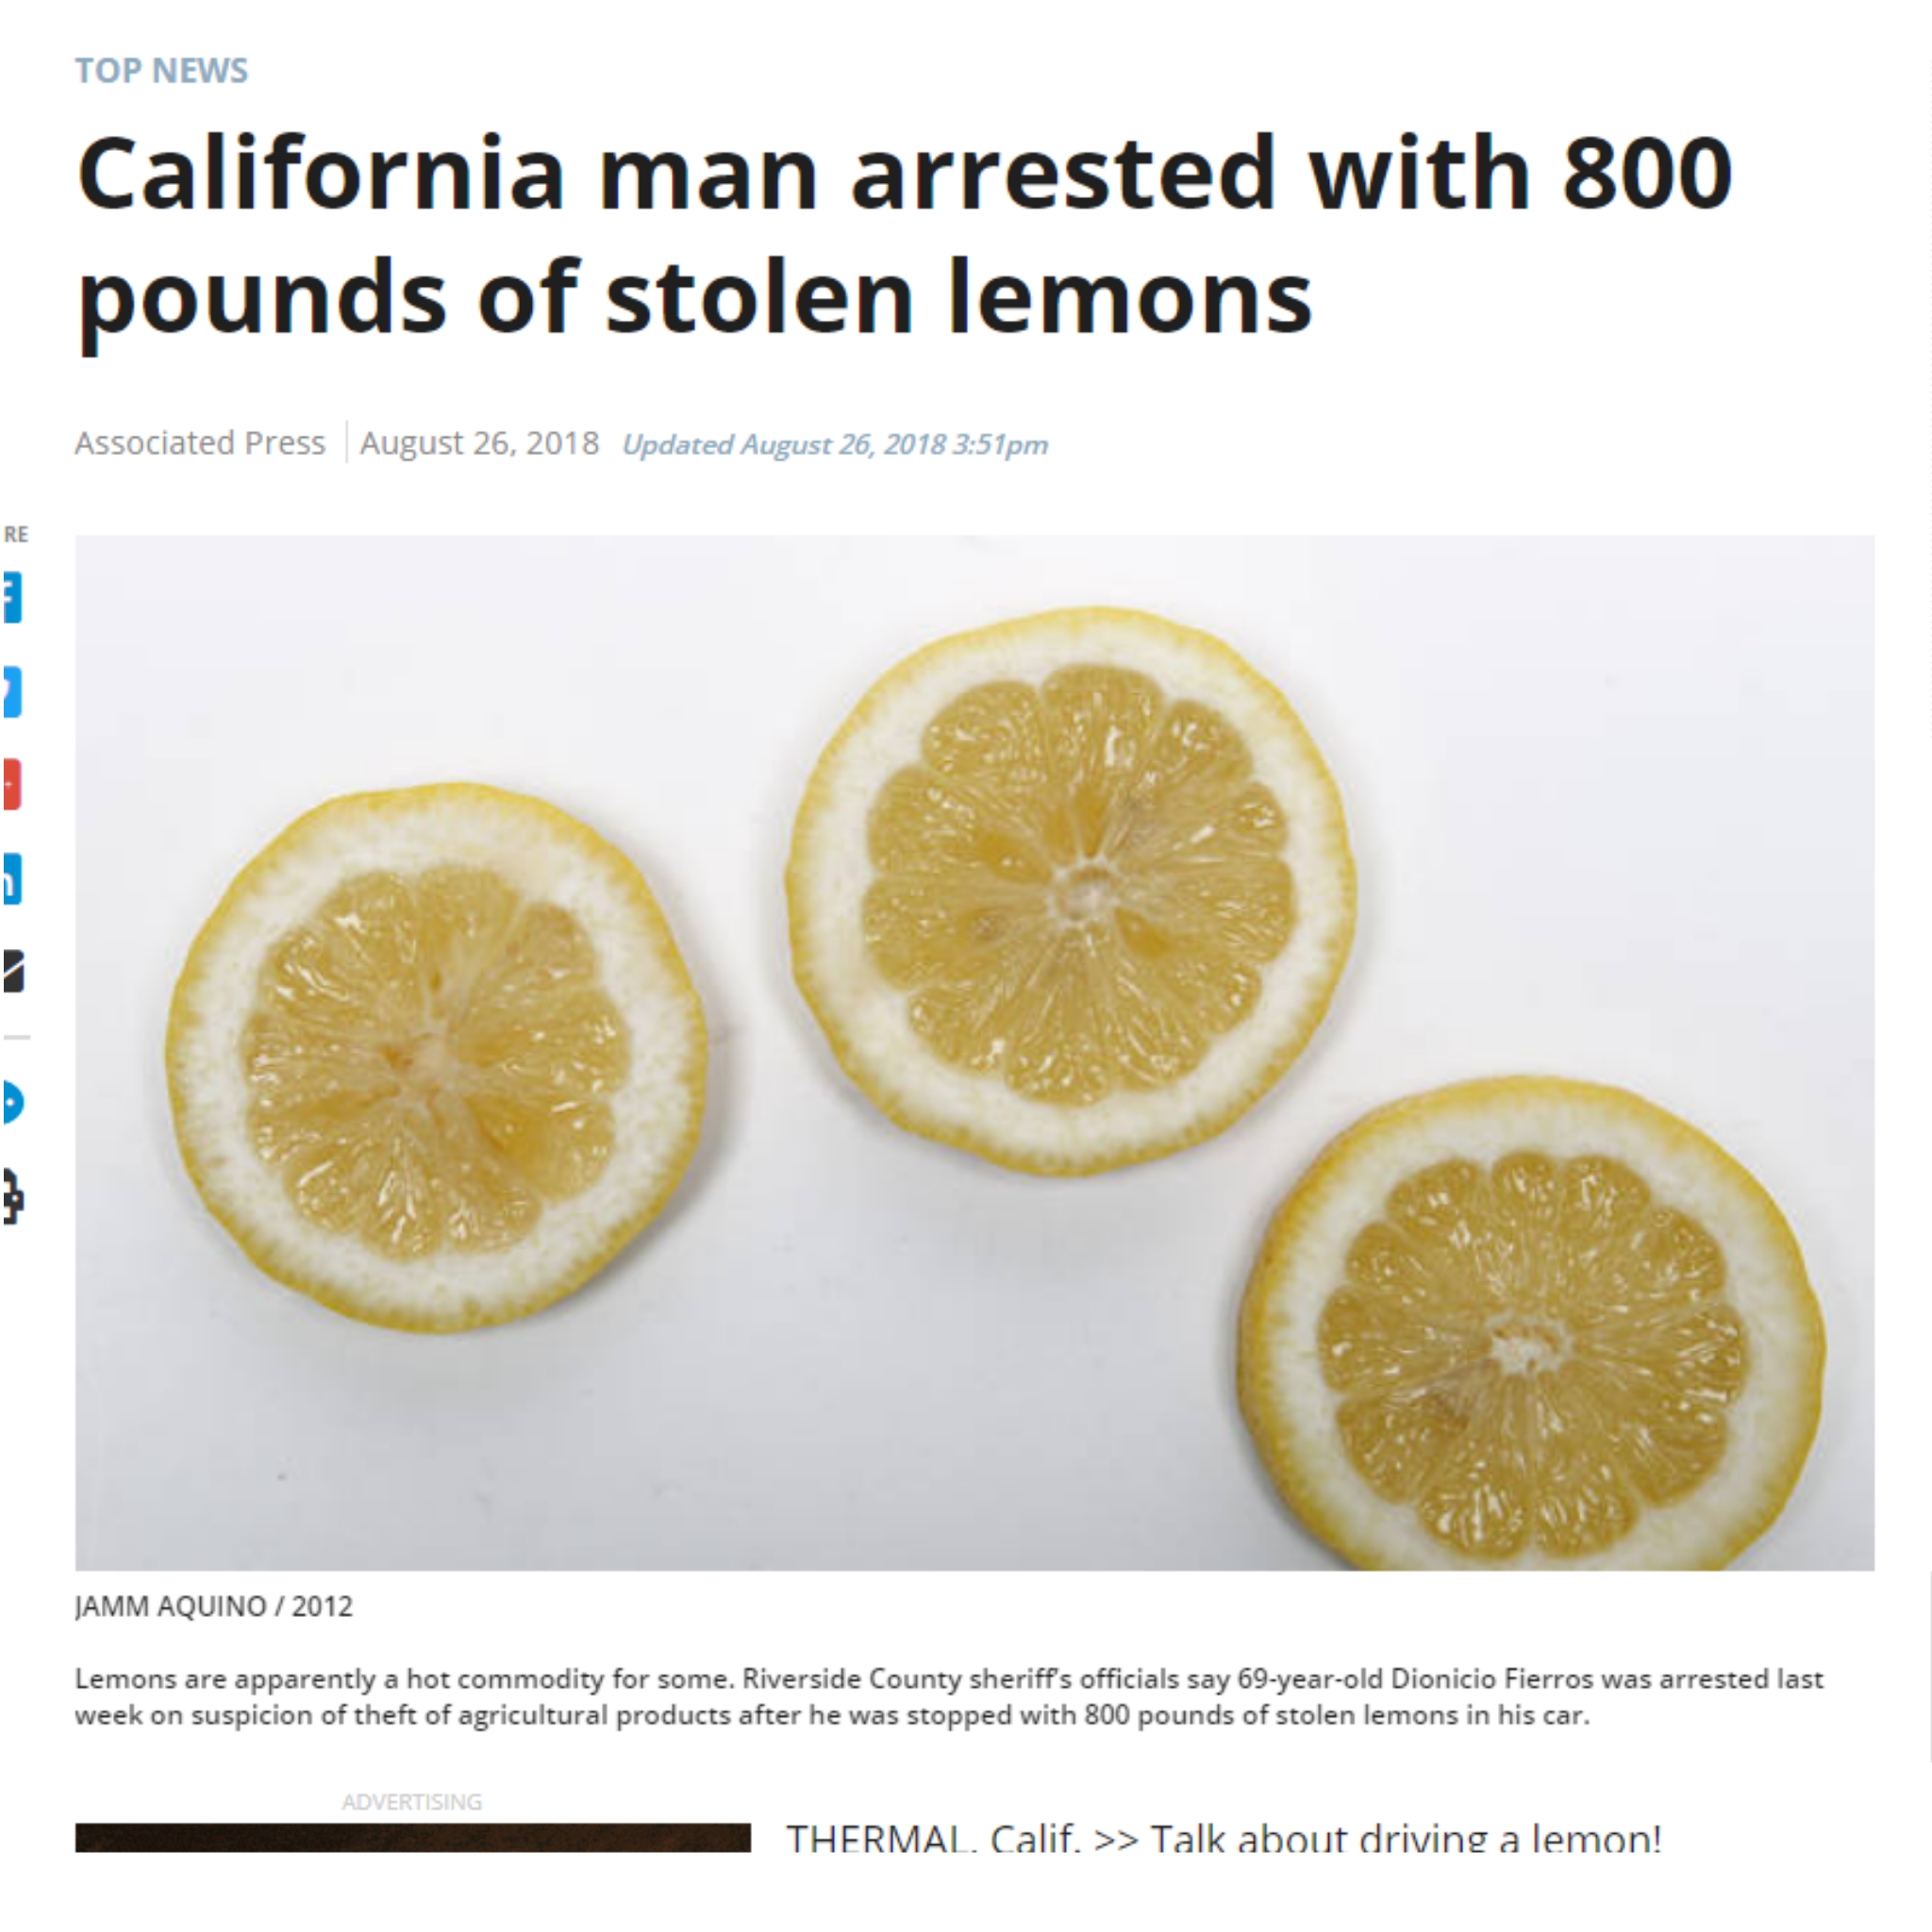 lemon - Top News California man arrested with 800 pounds of stolen lemons Associated Press Updated 2 pm Iamm Aquino 2012 das Lemons are apparently a het commodity for some Riverside County Sheriff's officials say yer on s on of the agricultural products f